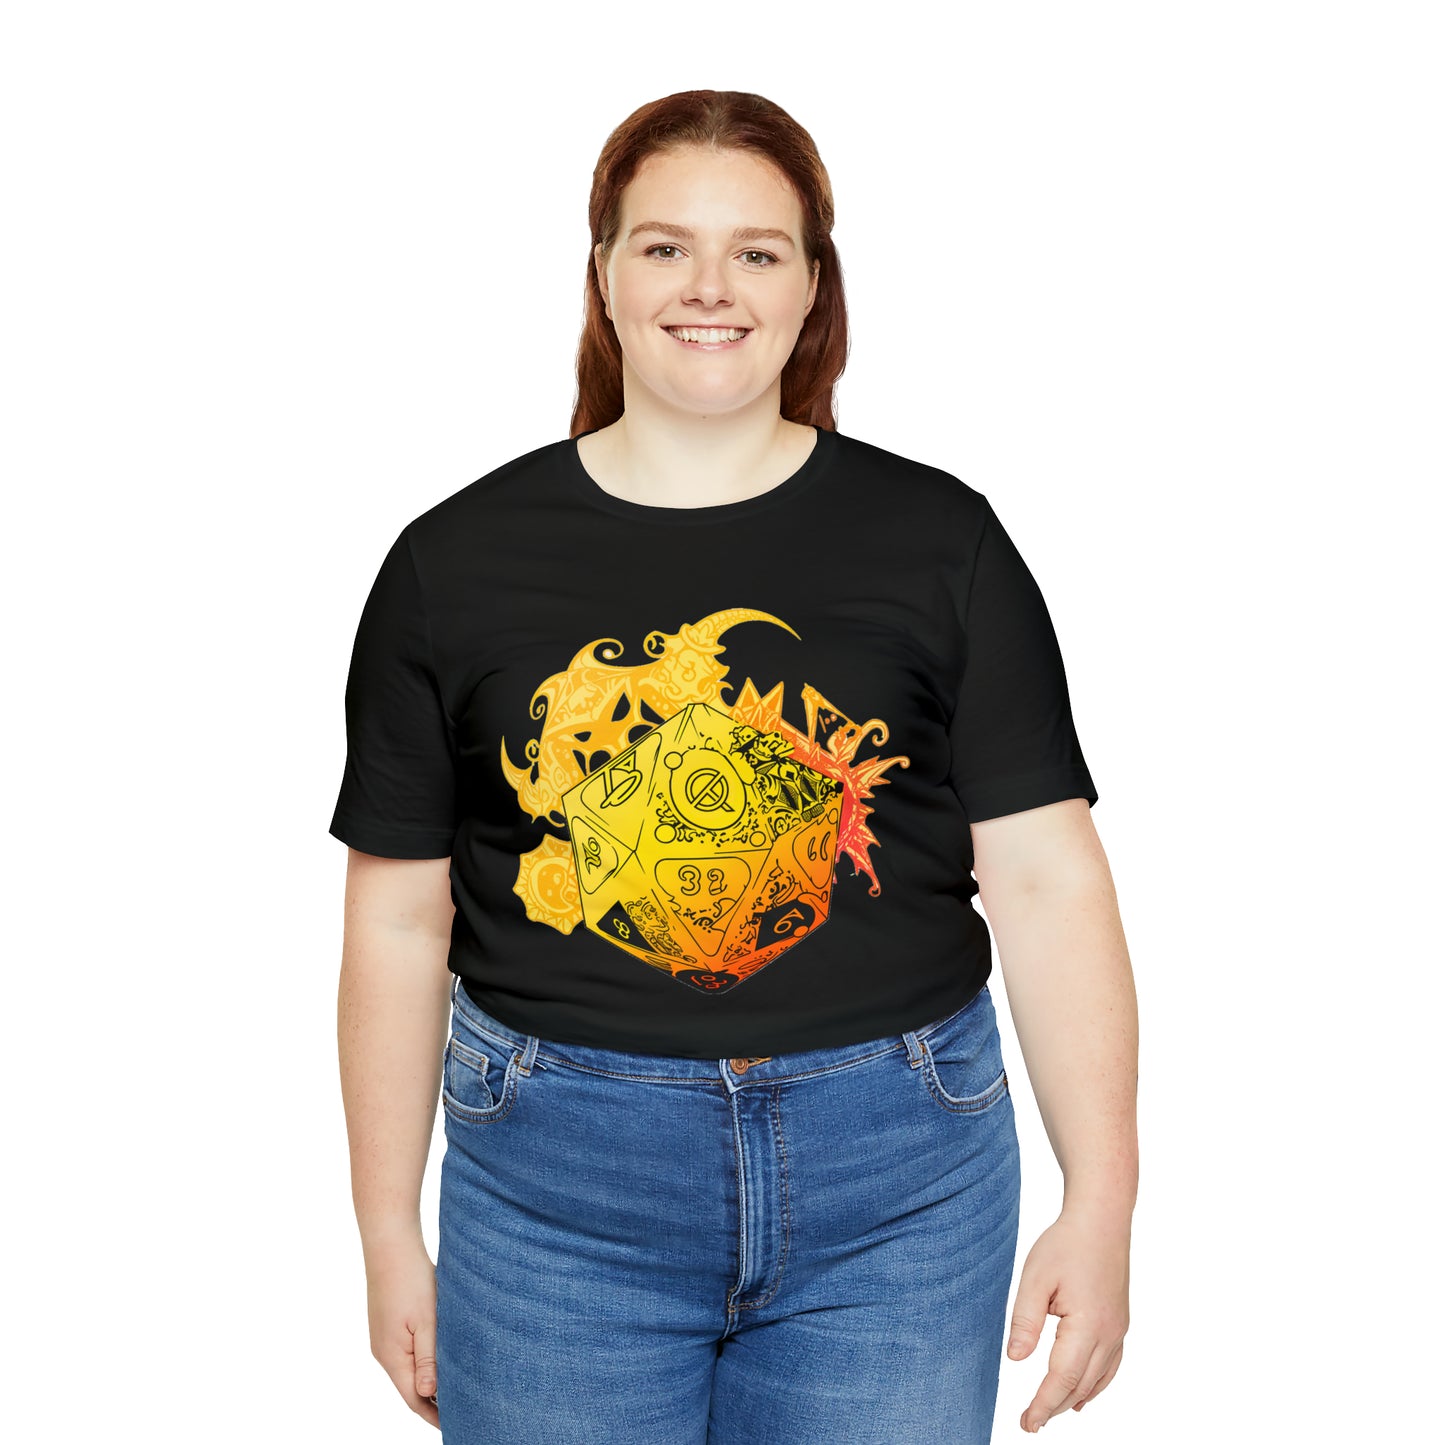 black-quest-thread-tee-shirt-with-large-yellow-dragon-dice-on-center-of-shirt